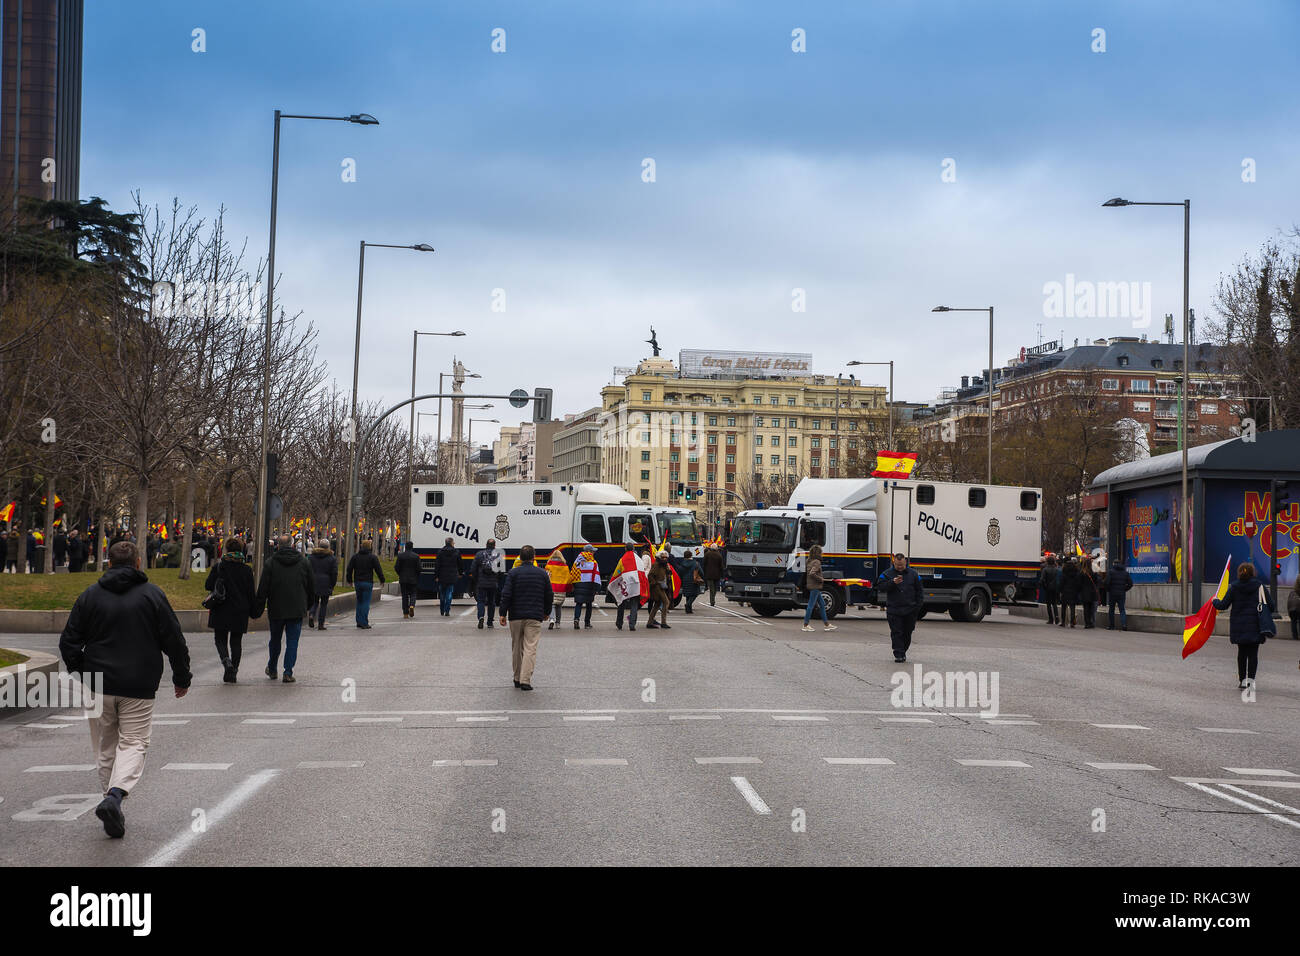 Madrid, Spain. 10th Feb 2019. Thousands of people have demonstrated in Madrid against the politics of the nation president Pedro Sanchez. The demonstration was convened by the main opposition parties. In the picture two police truck to prevent incidents. Credit: F. J. Carneros/Alamy Live News Stock Photo